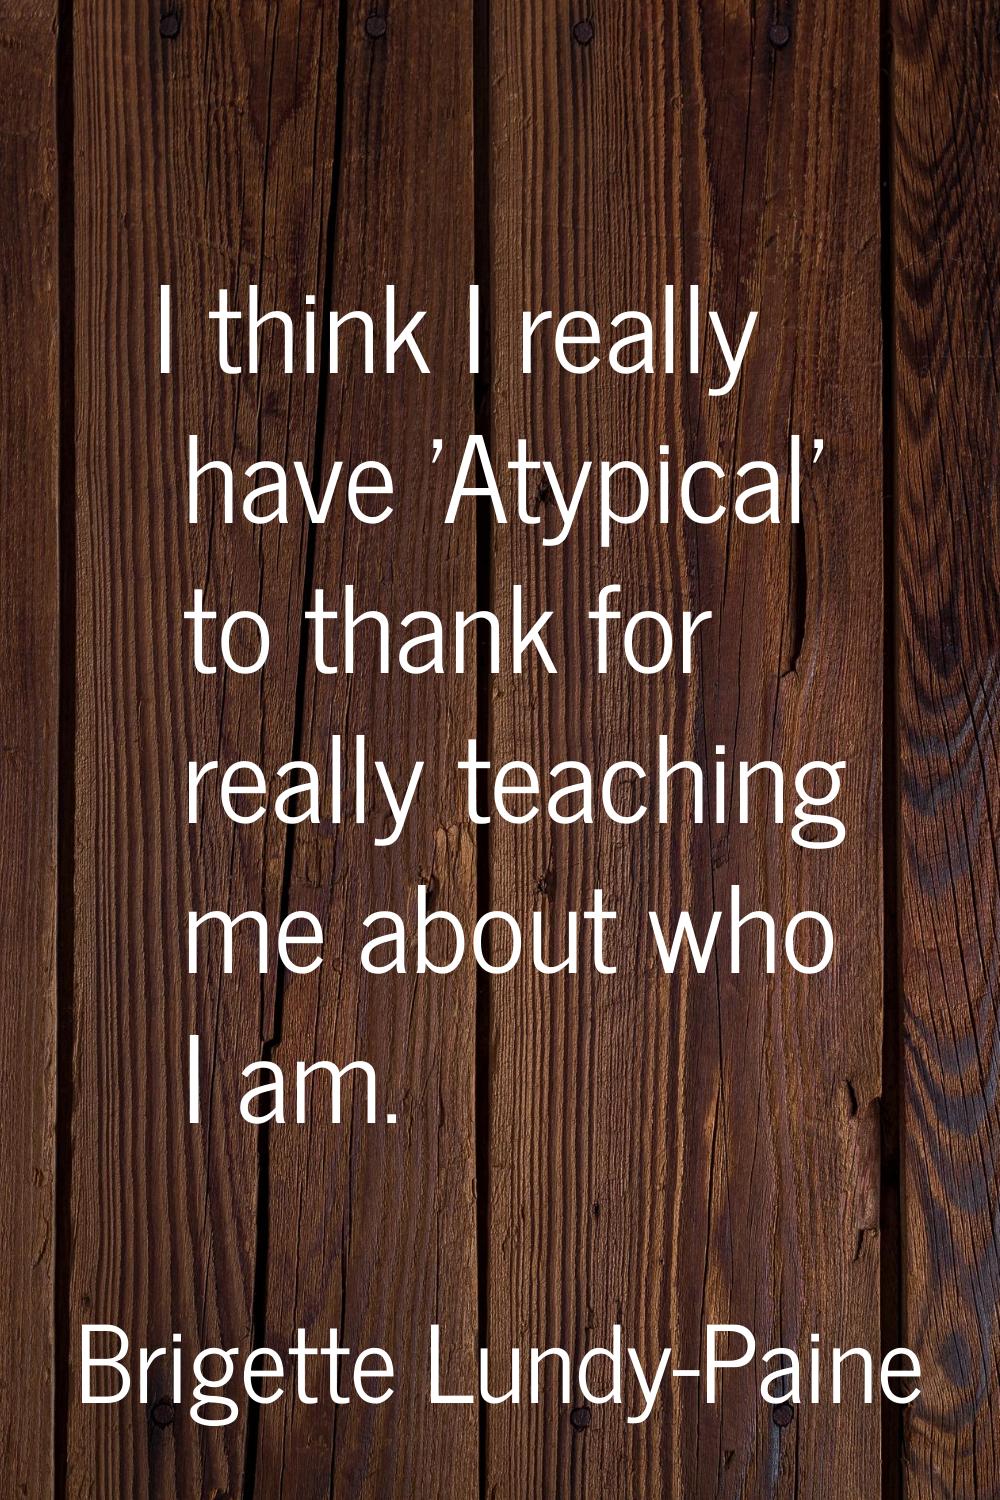 I think I really have 'Atypical' to thank for really teaching me about who I am.